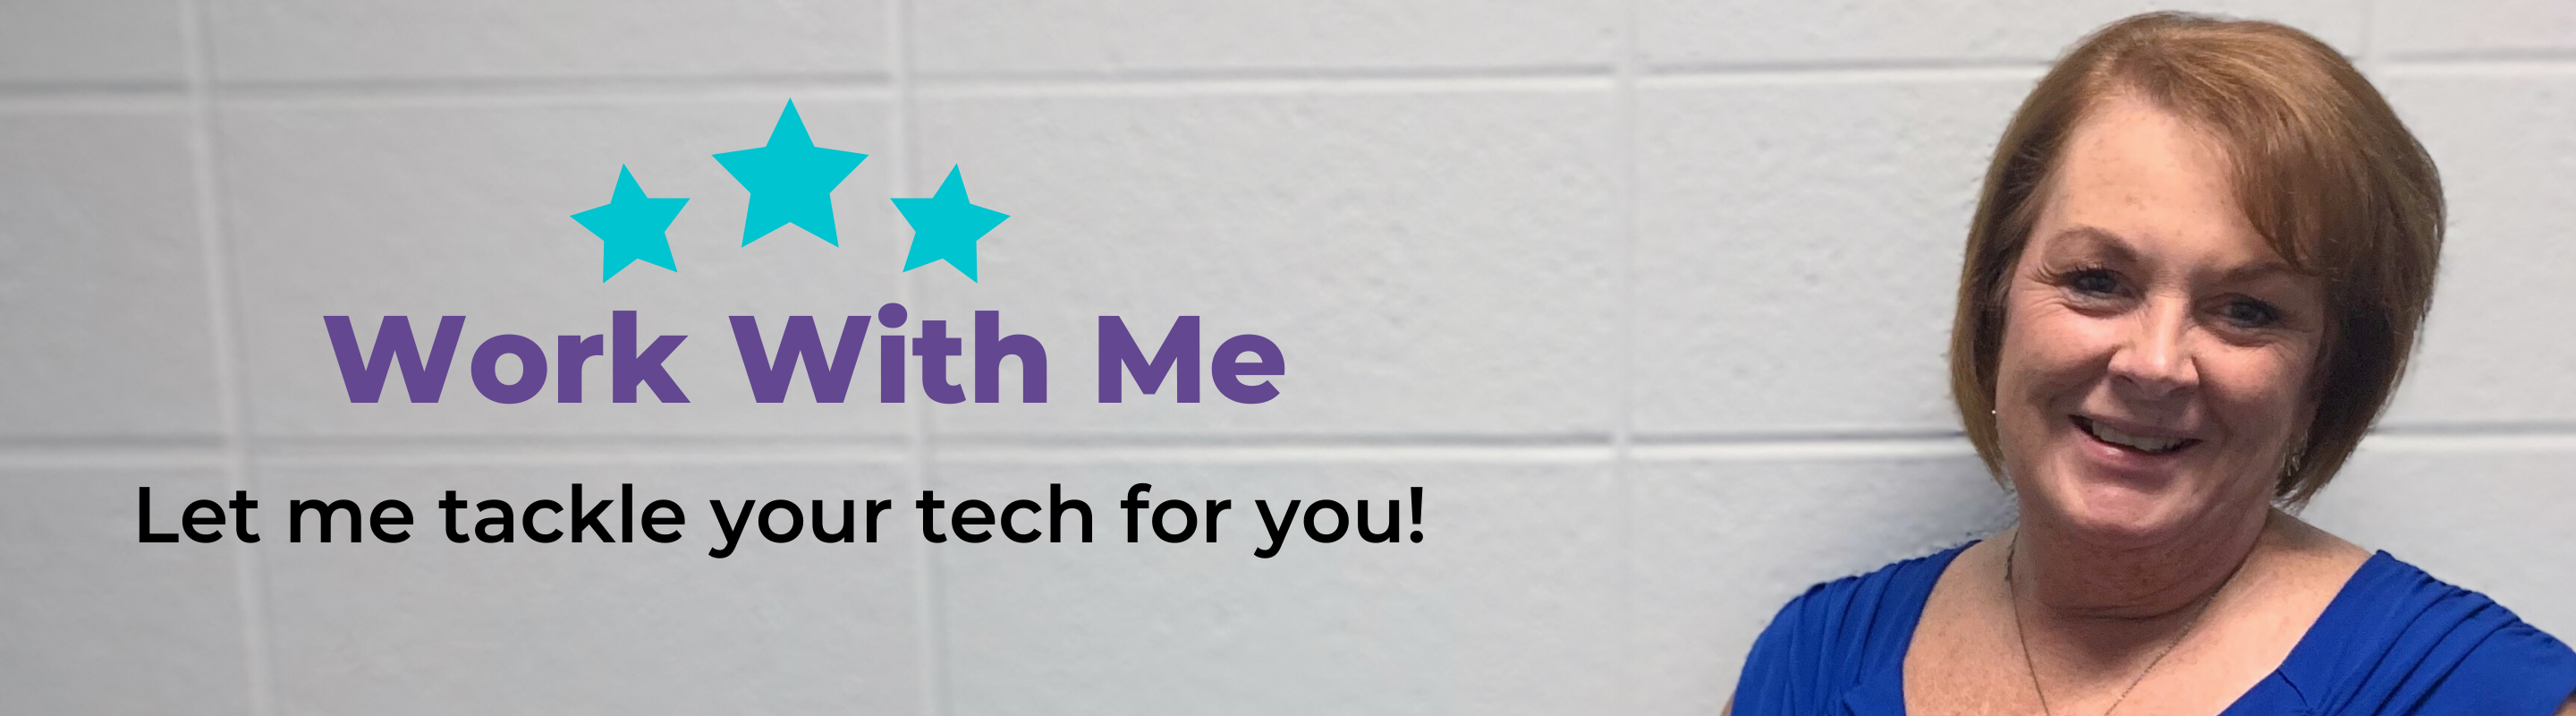 Work With Me Banner